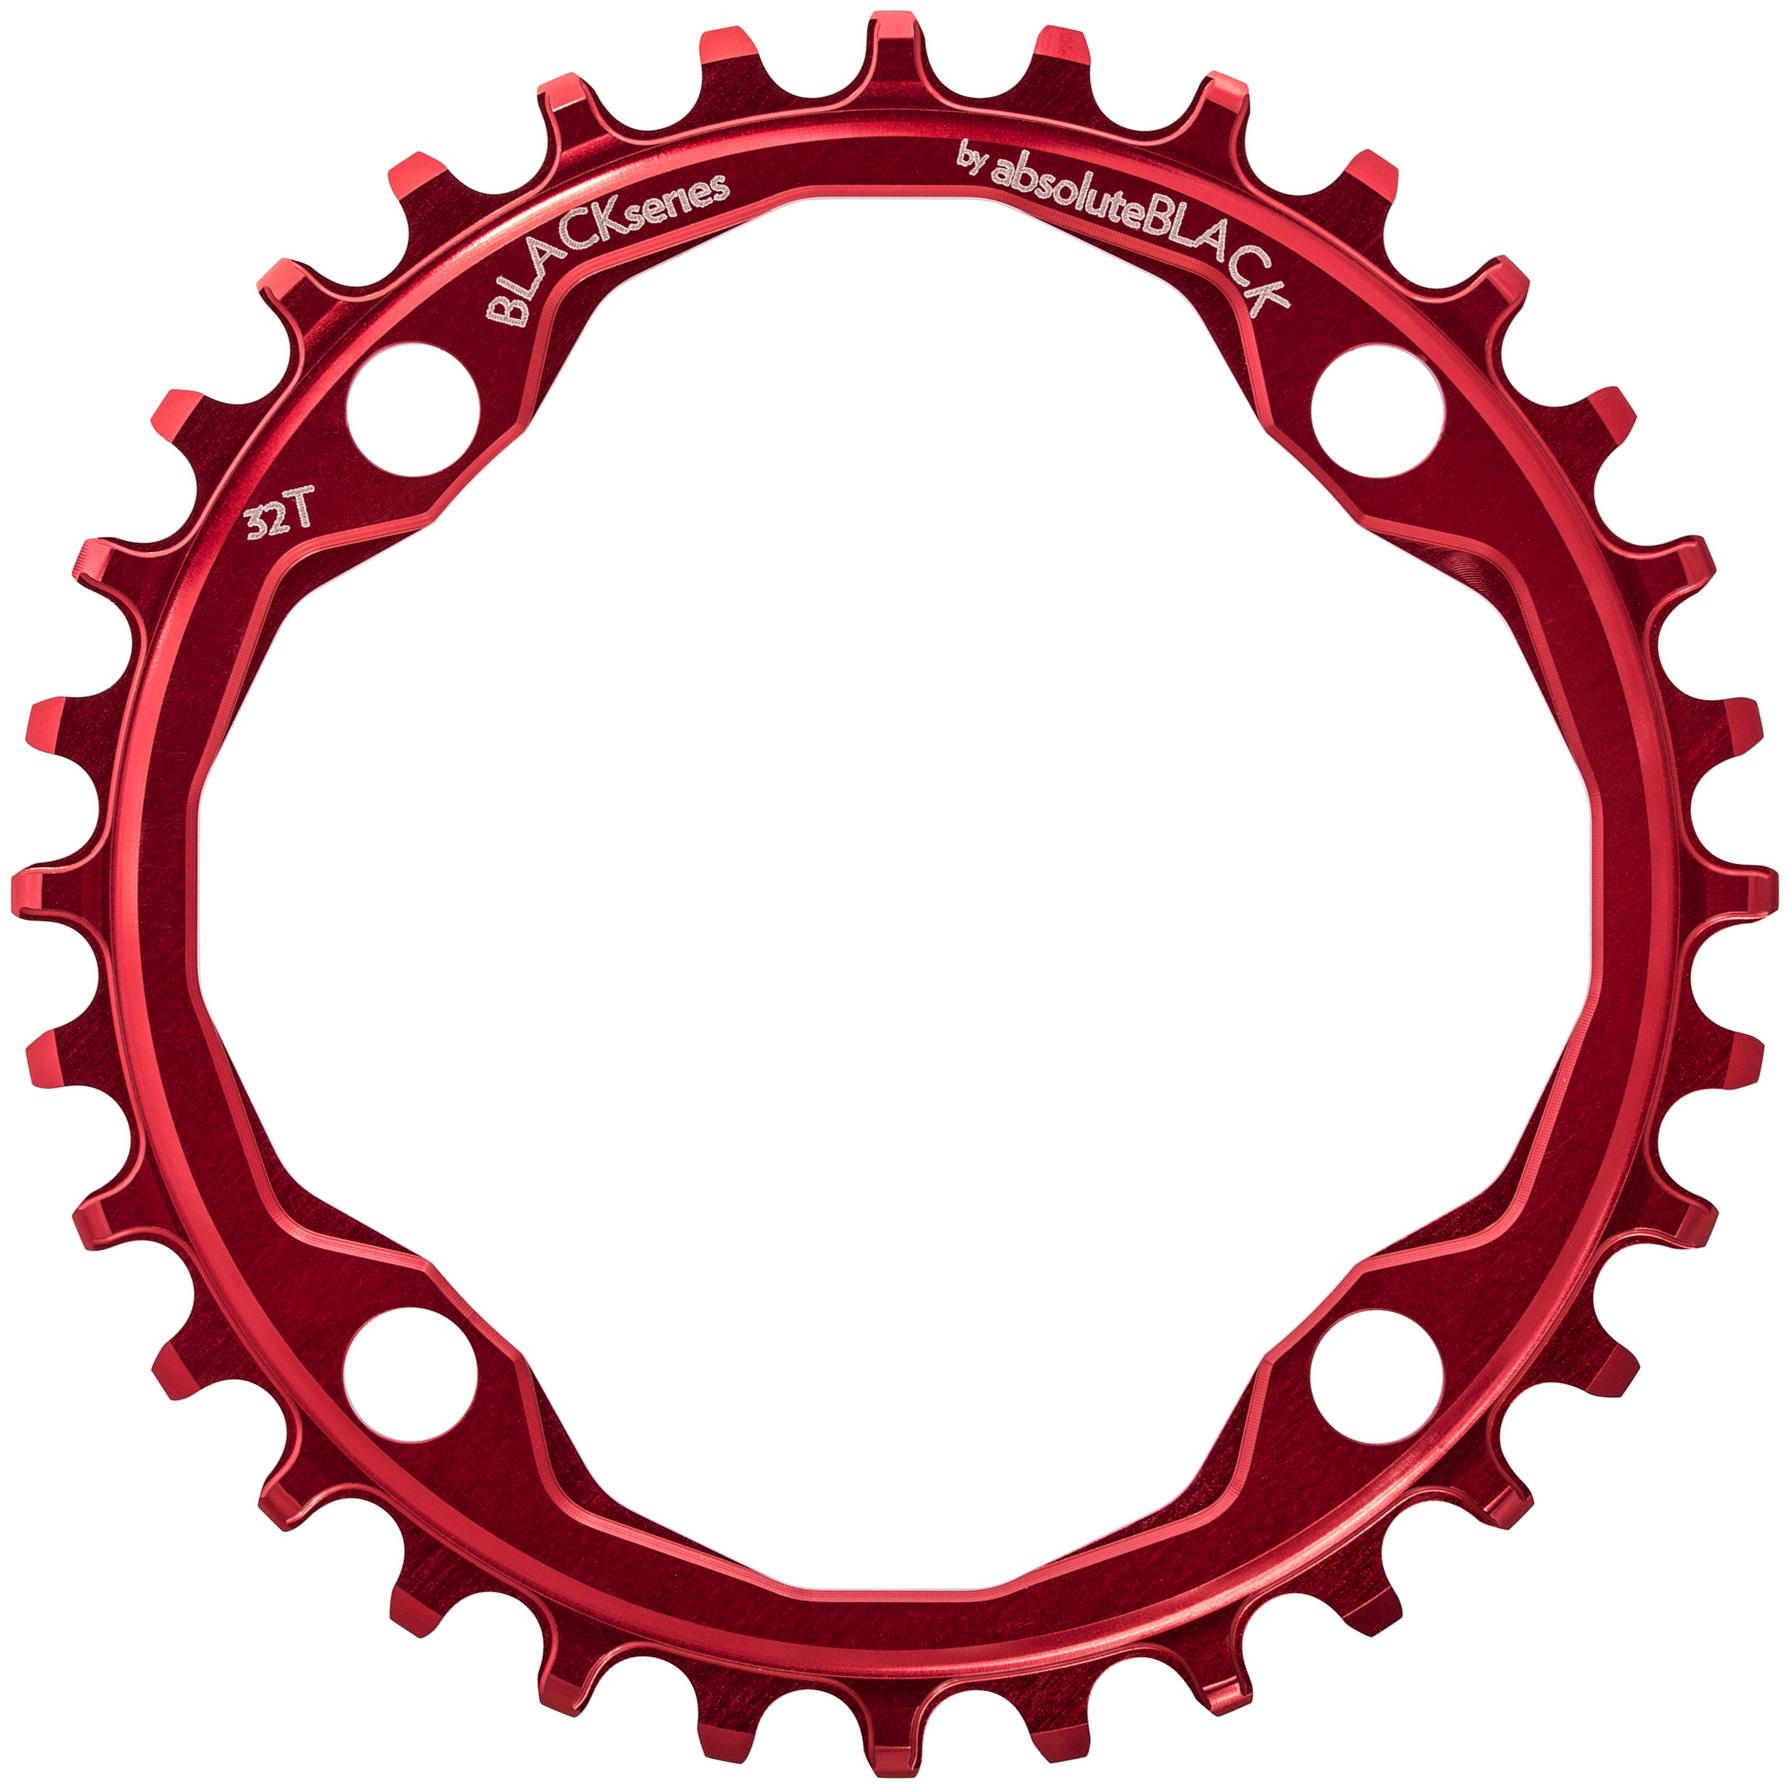 Image of BLACK by Absolutebla Narrow Wide Chainring - Red